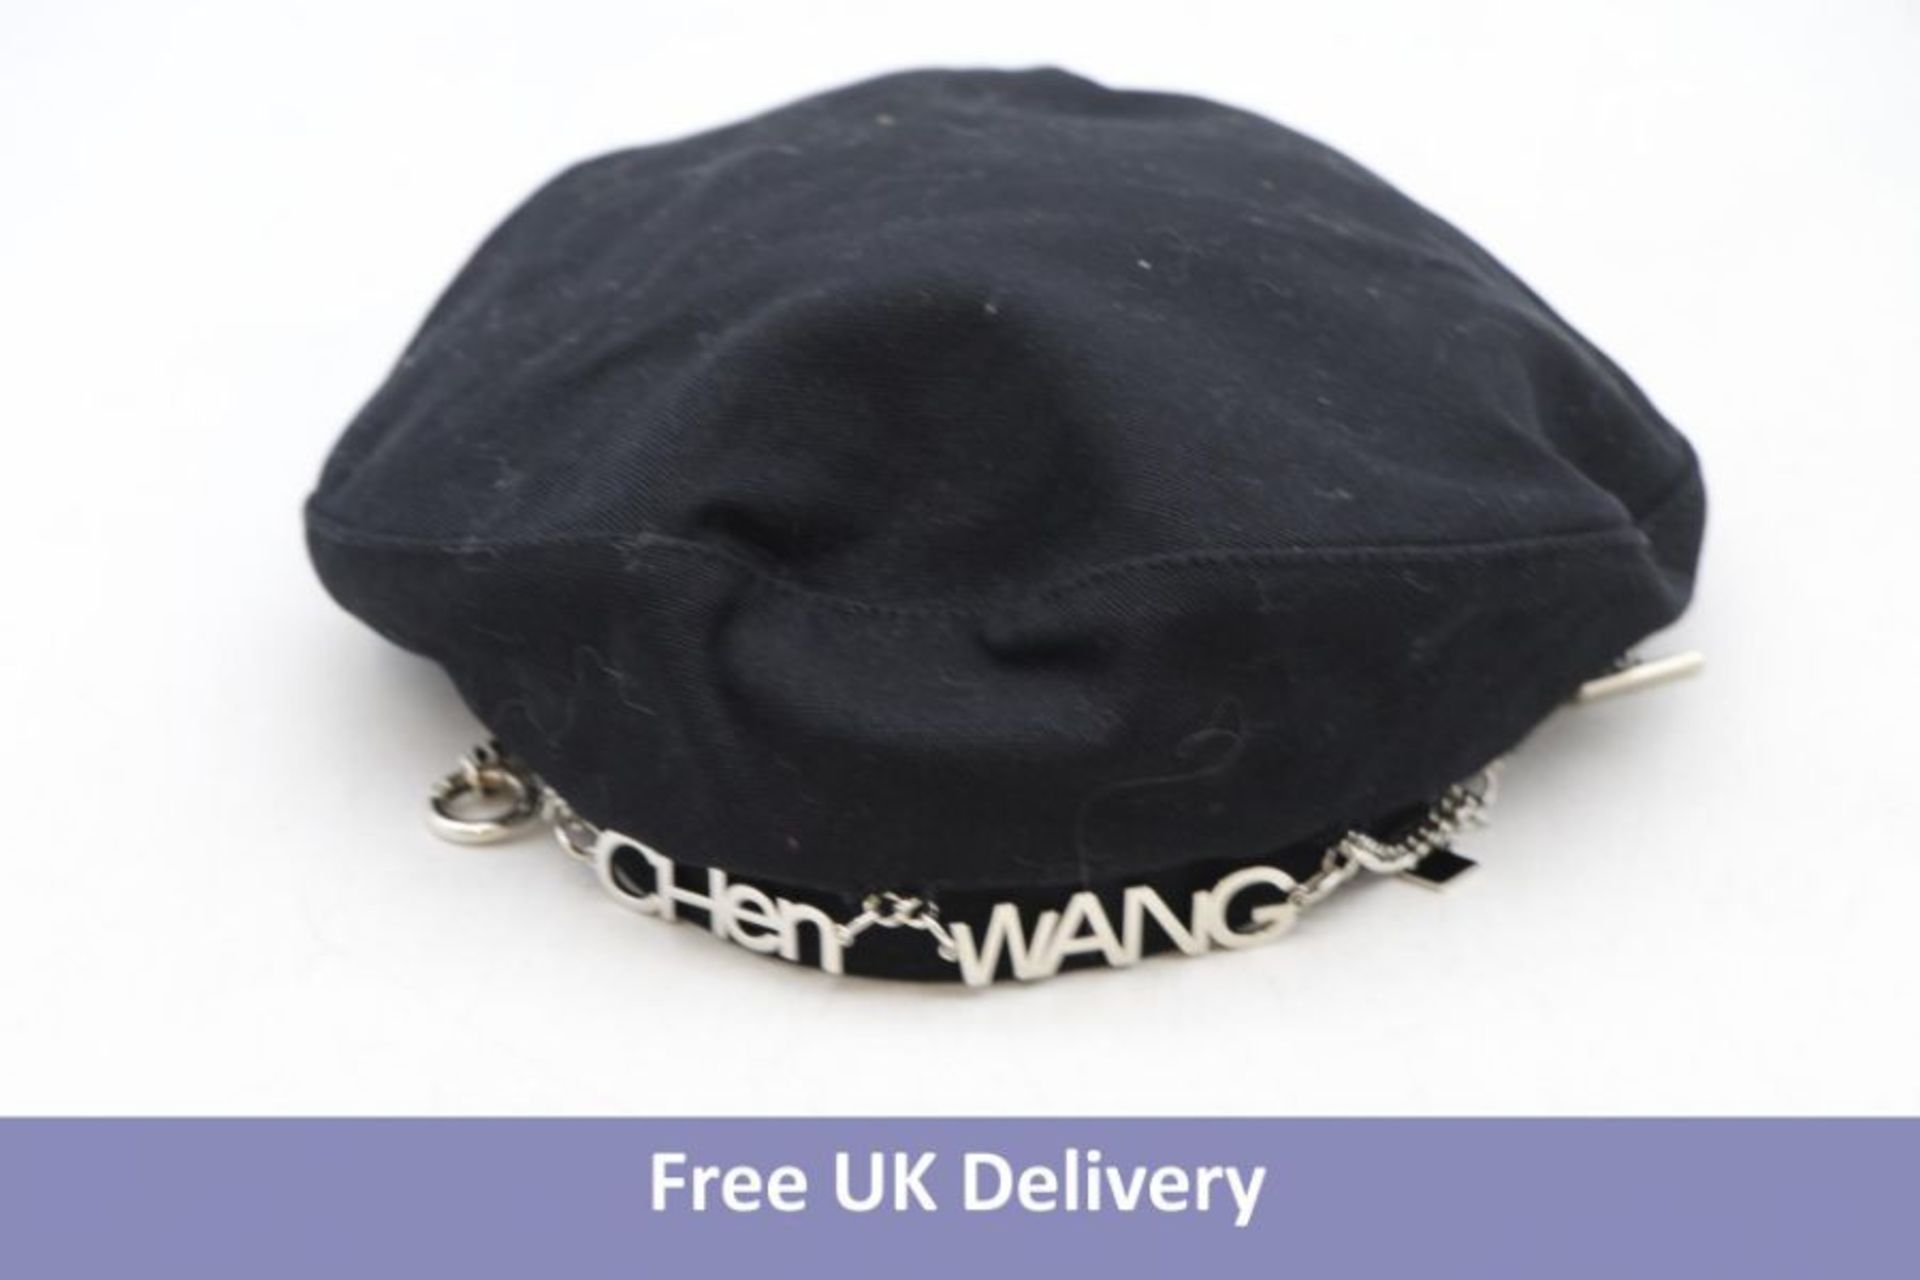 Feng Chen Wang Hat, Black, One Size